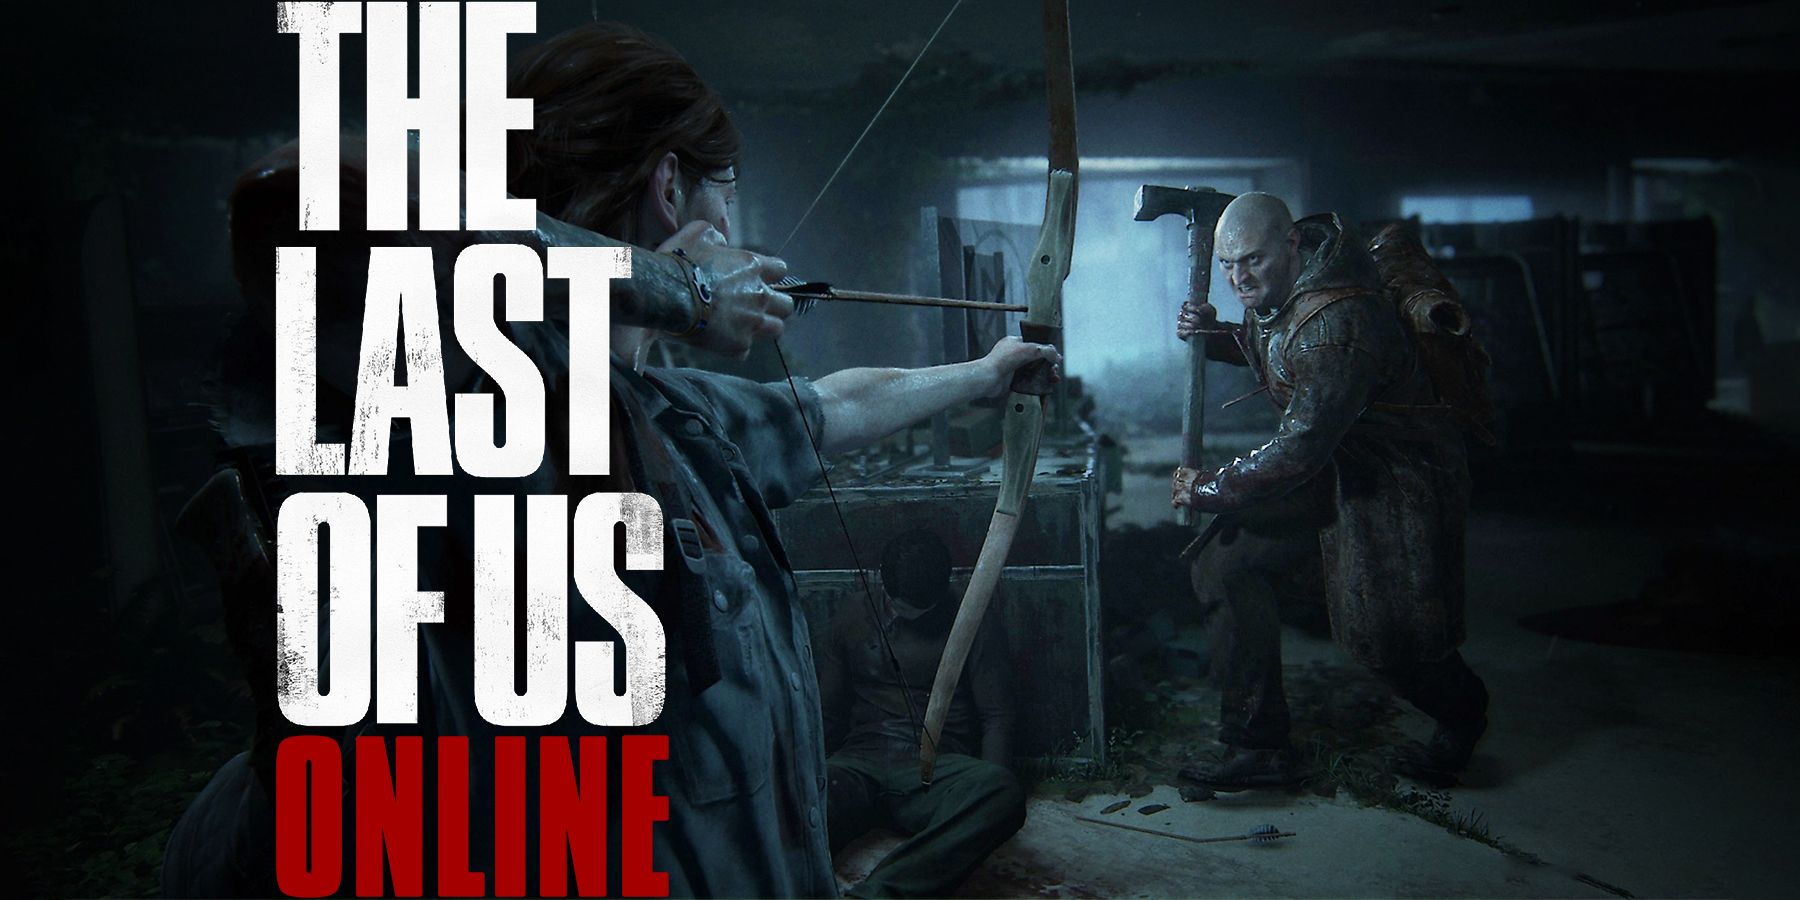 The Last Of Us 2 Won't Get DLC Like Left Behind, But An Online